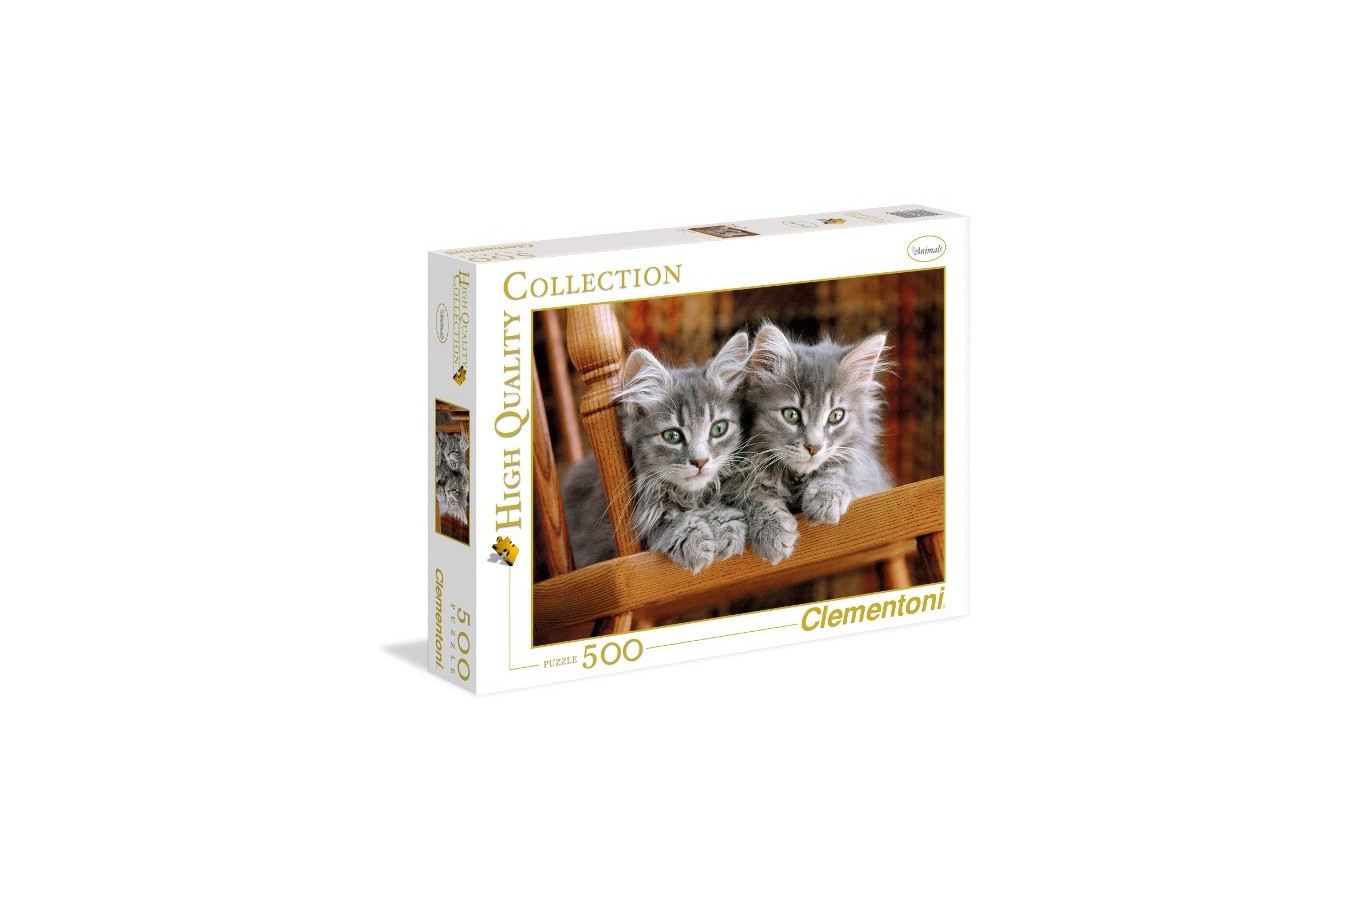 Puzzle Clementoni - Gray Kittens on the chair, 500 piese (44107)